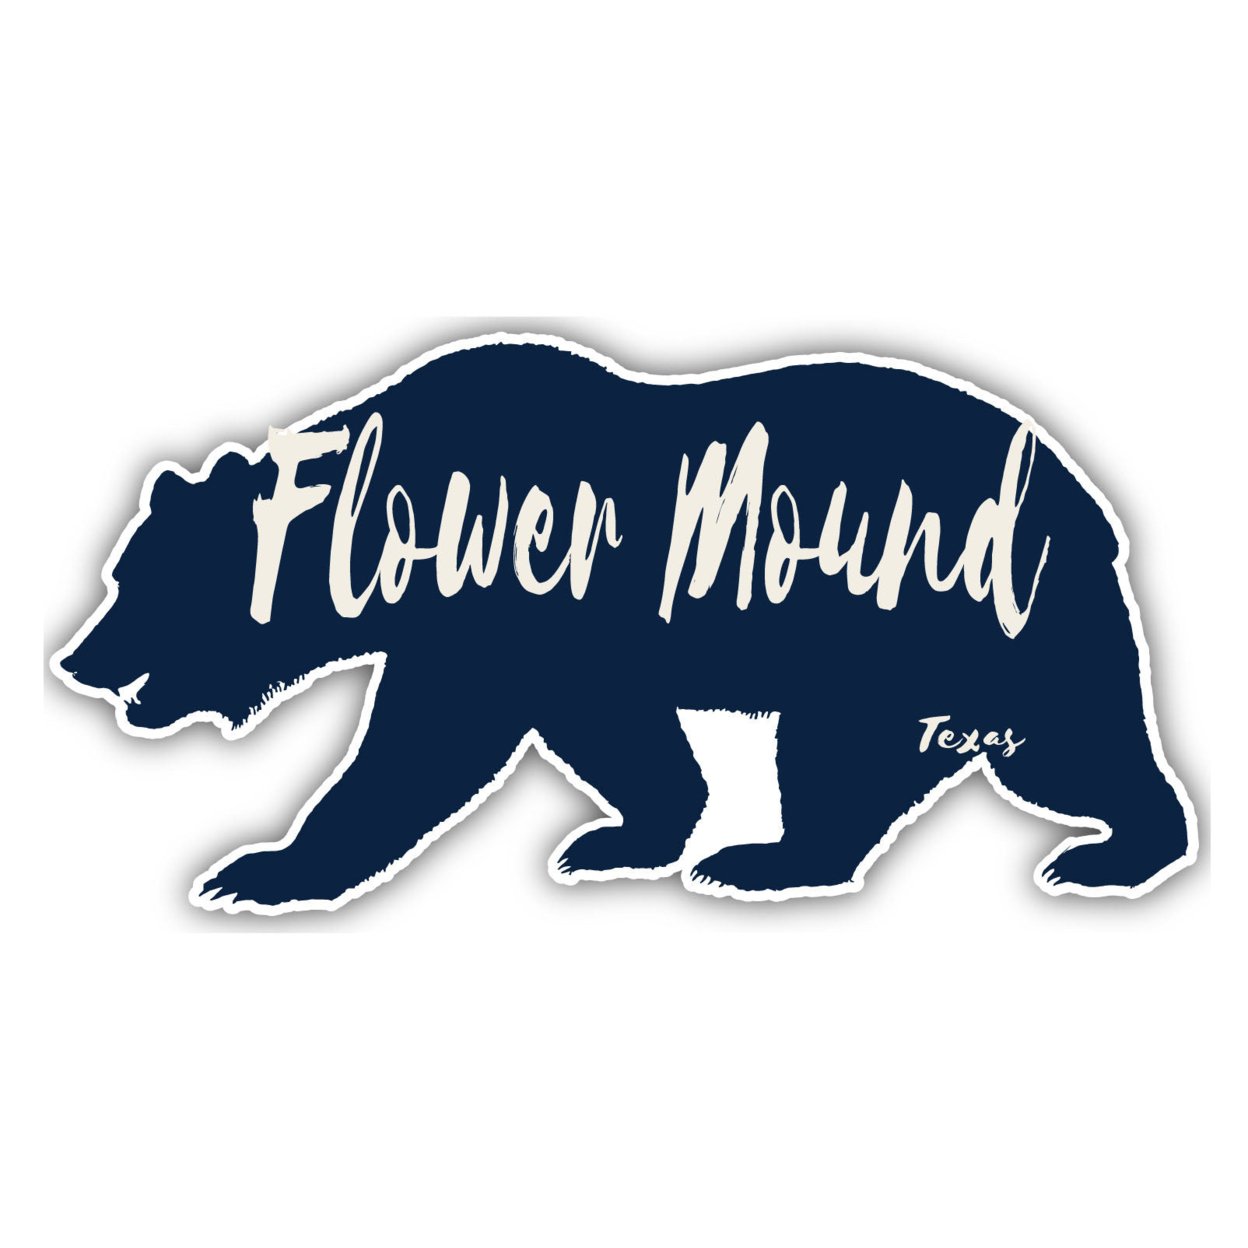 Flower Mound Texas Souvenir Decorative Stickers (Choose Theme And Size) - 4-Pack, 2-Inch, Camp Life